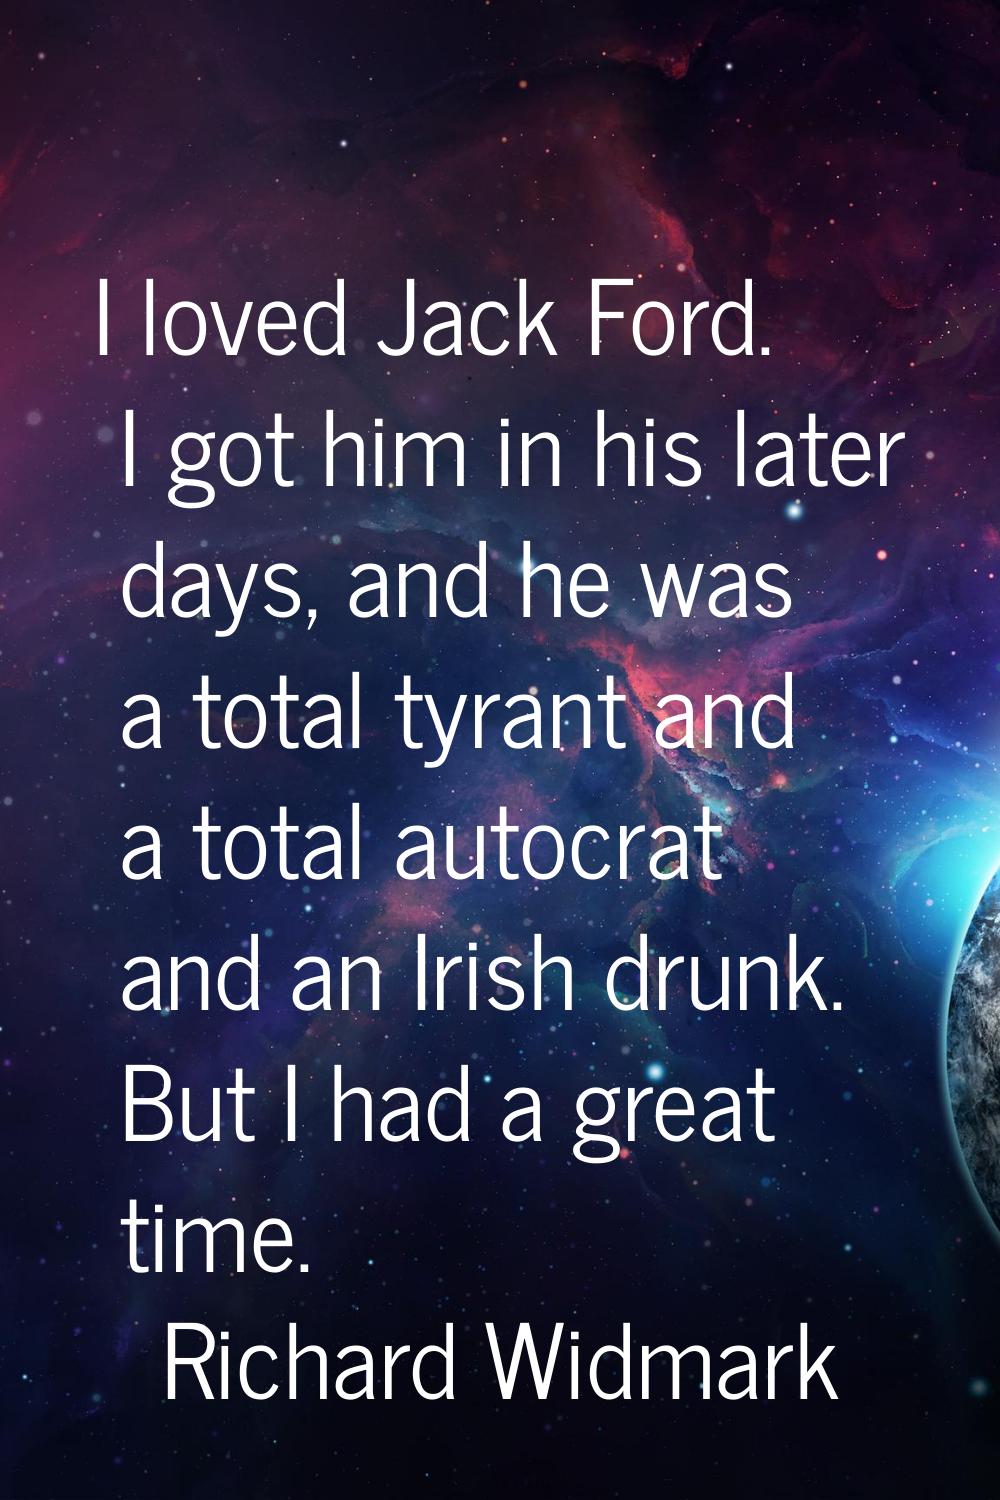 I loved Jack Ford. I got him in his later days, and he was a total tyrant and a total autocrat and 